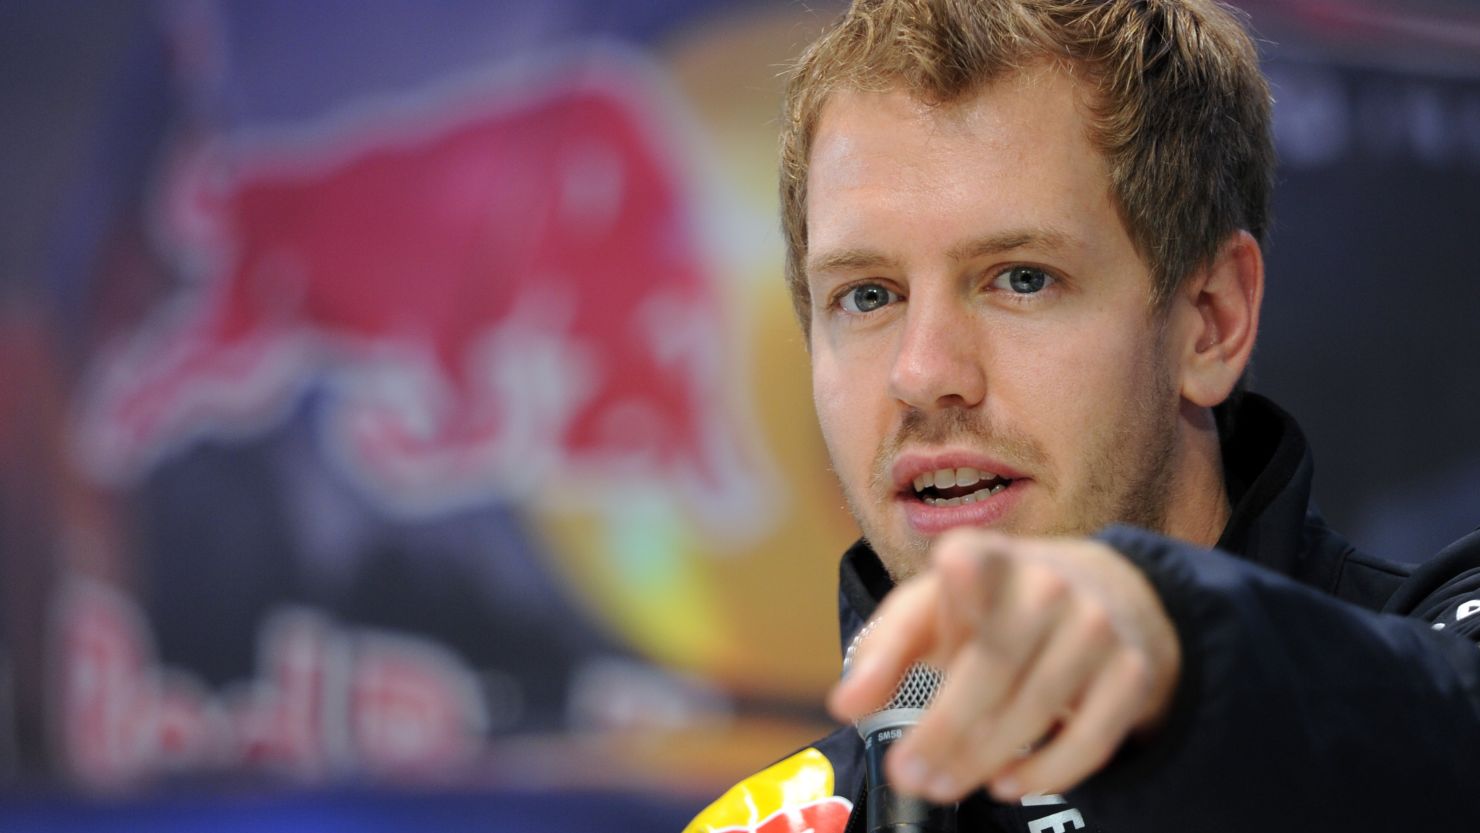 Sebastian Vettel has won 11 out of 18 races on his way to the 2011 Formula One world championship.